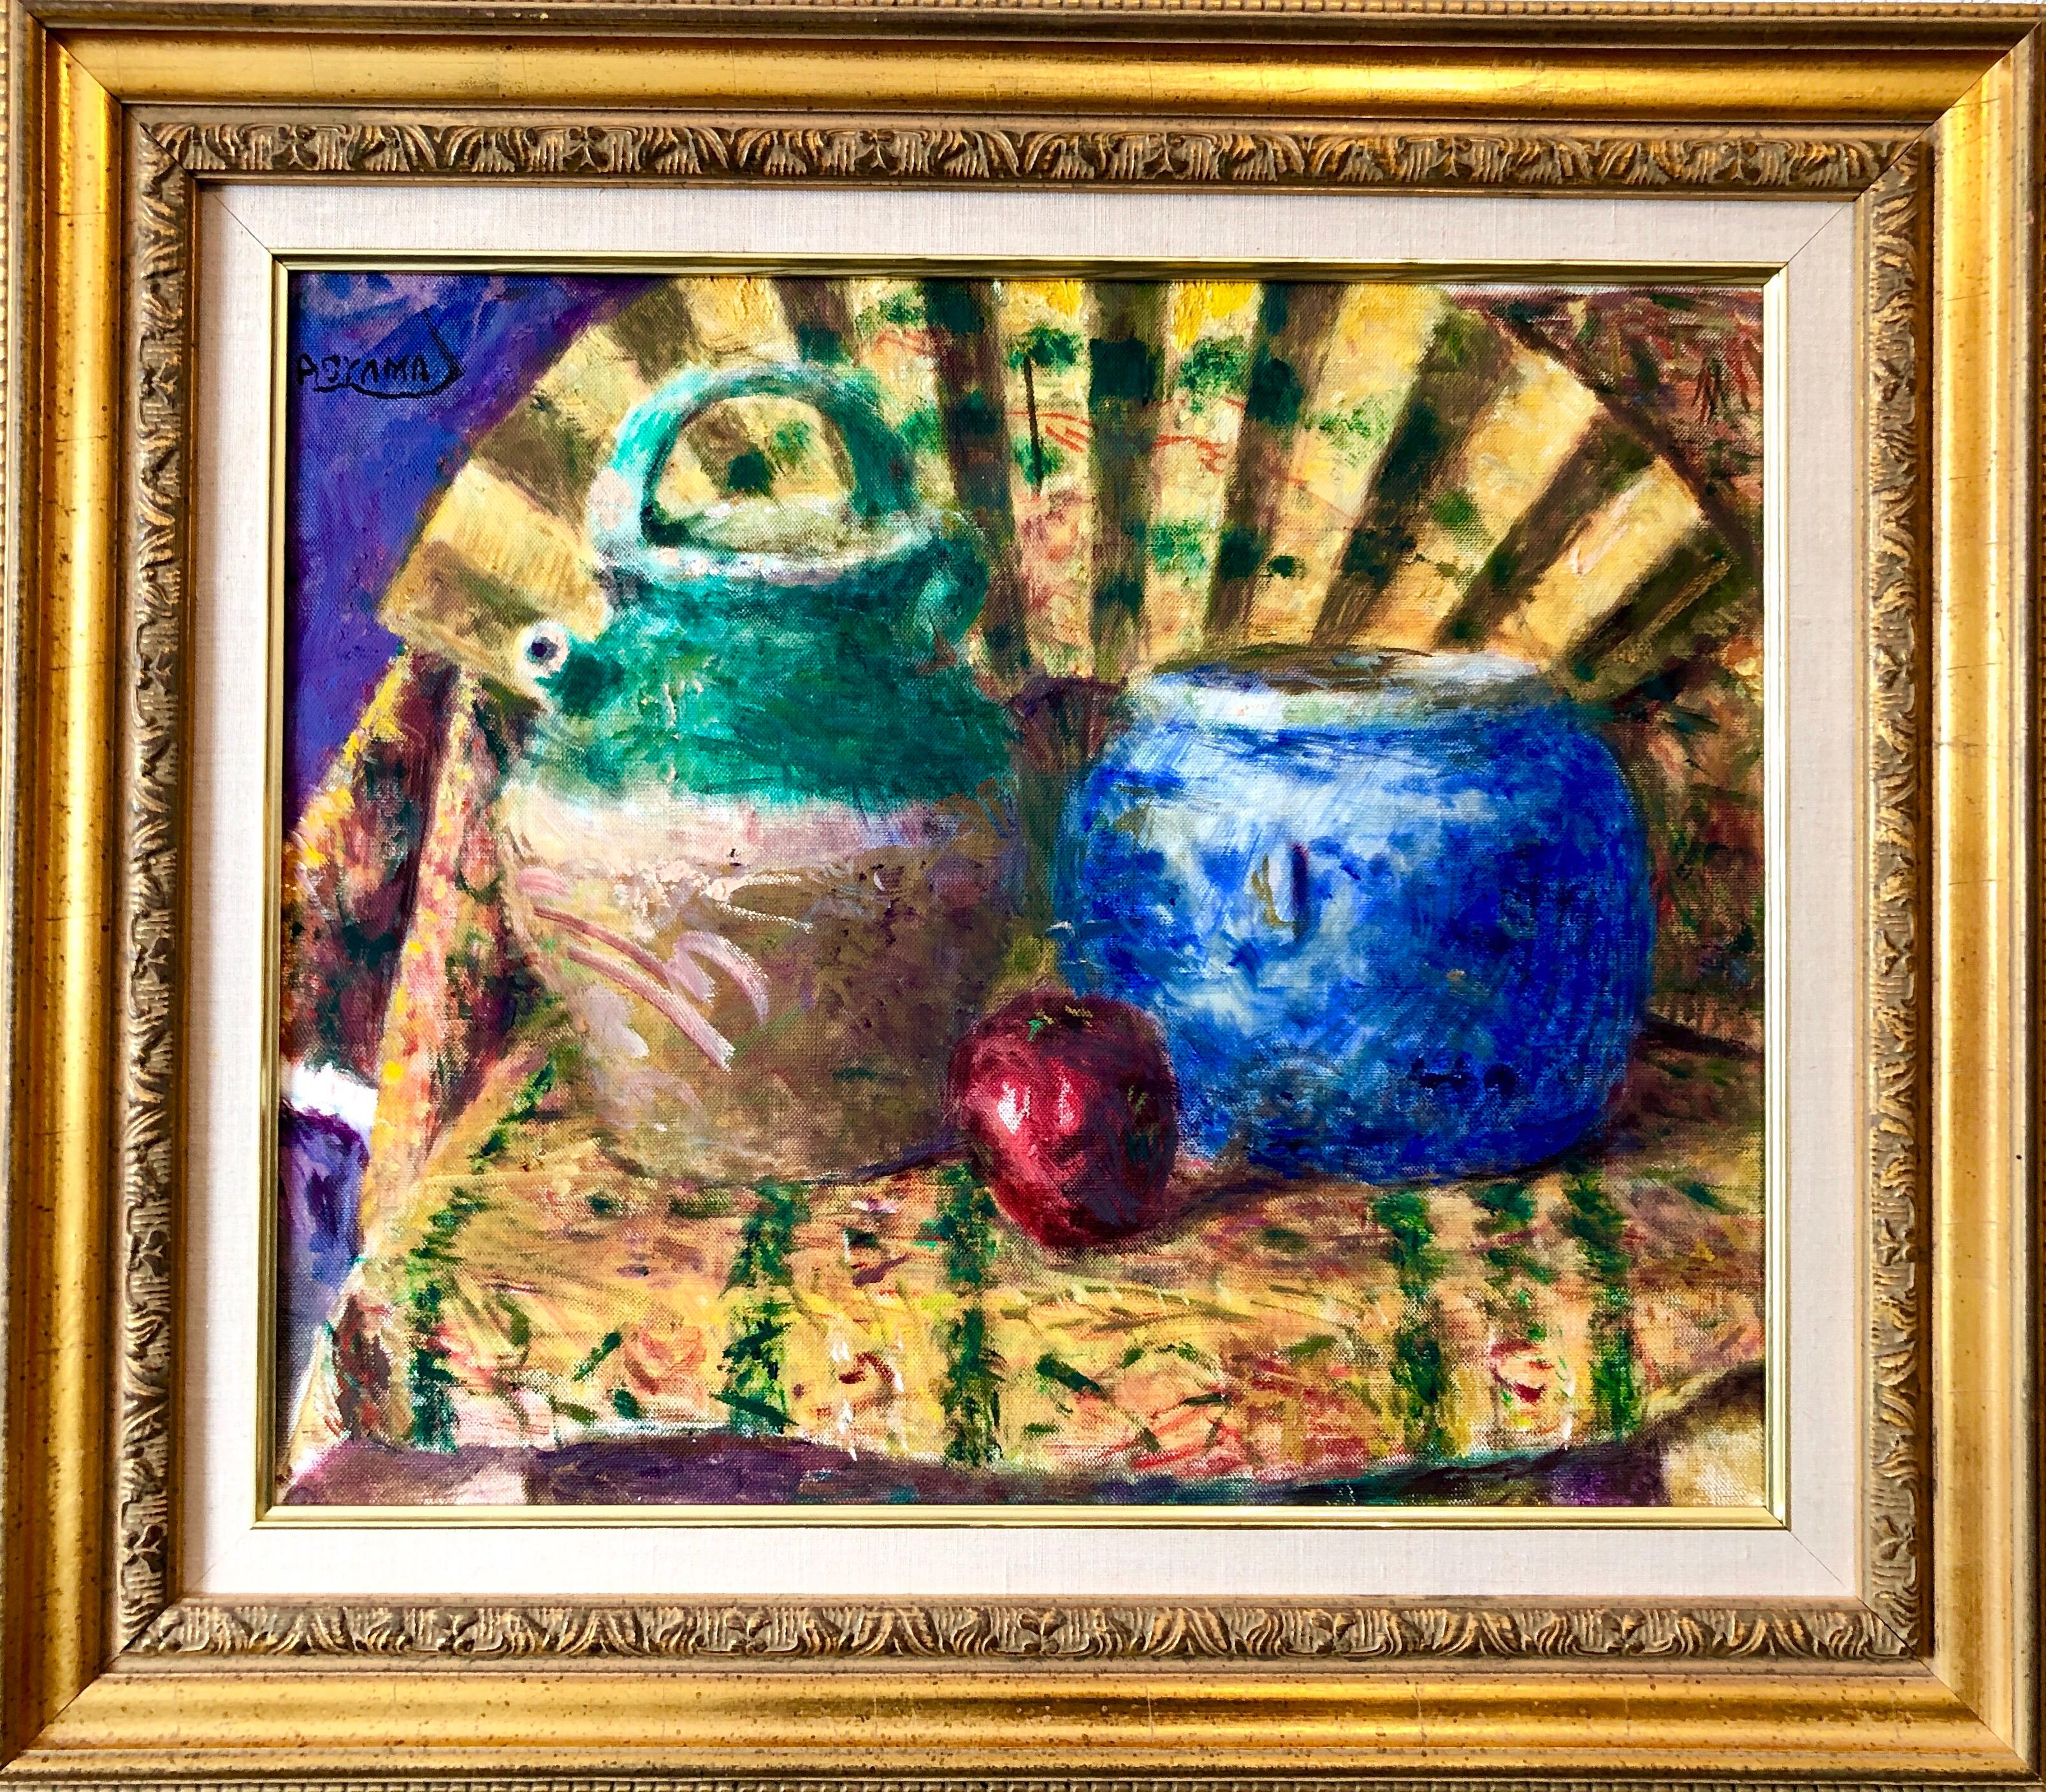 Japanese Fauvist Colorful Oil Painting Chinese Ceramic Jars with Fan and Apple